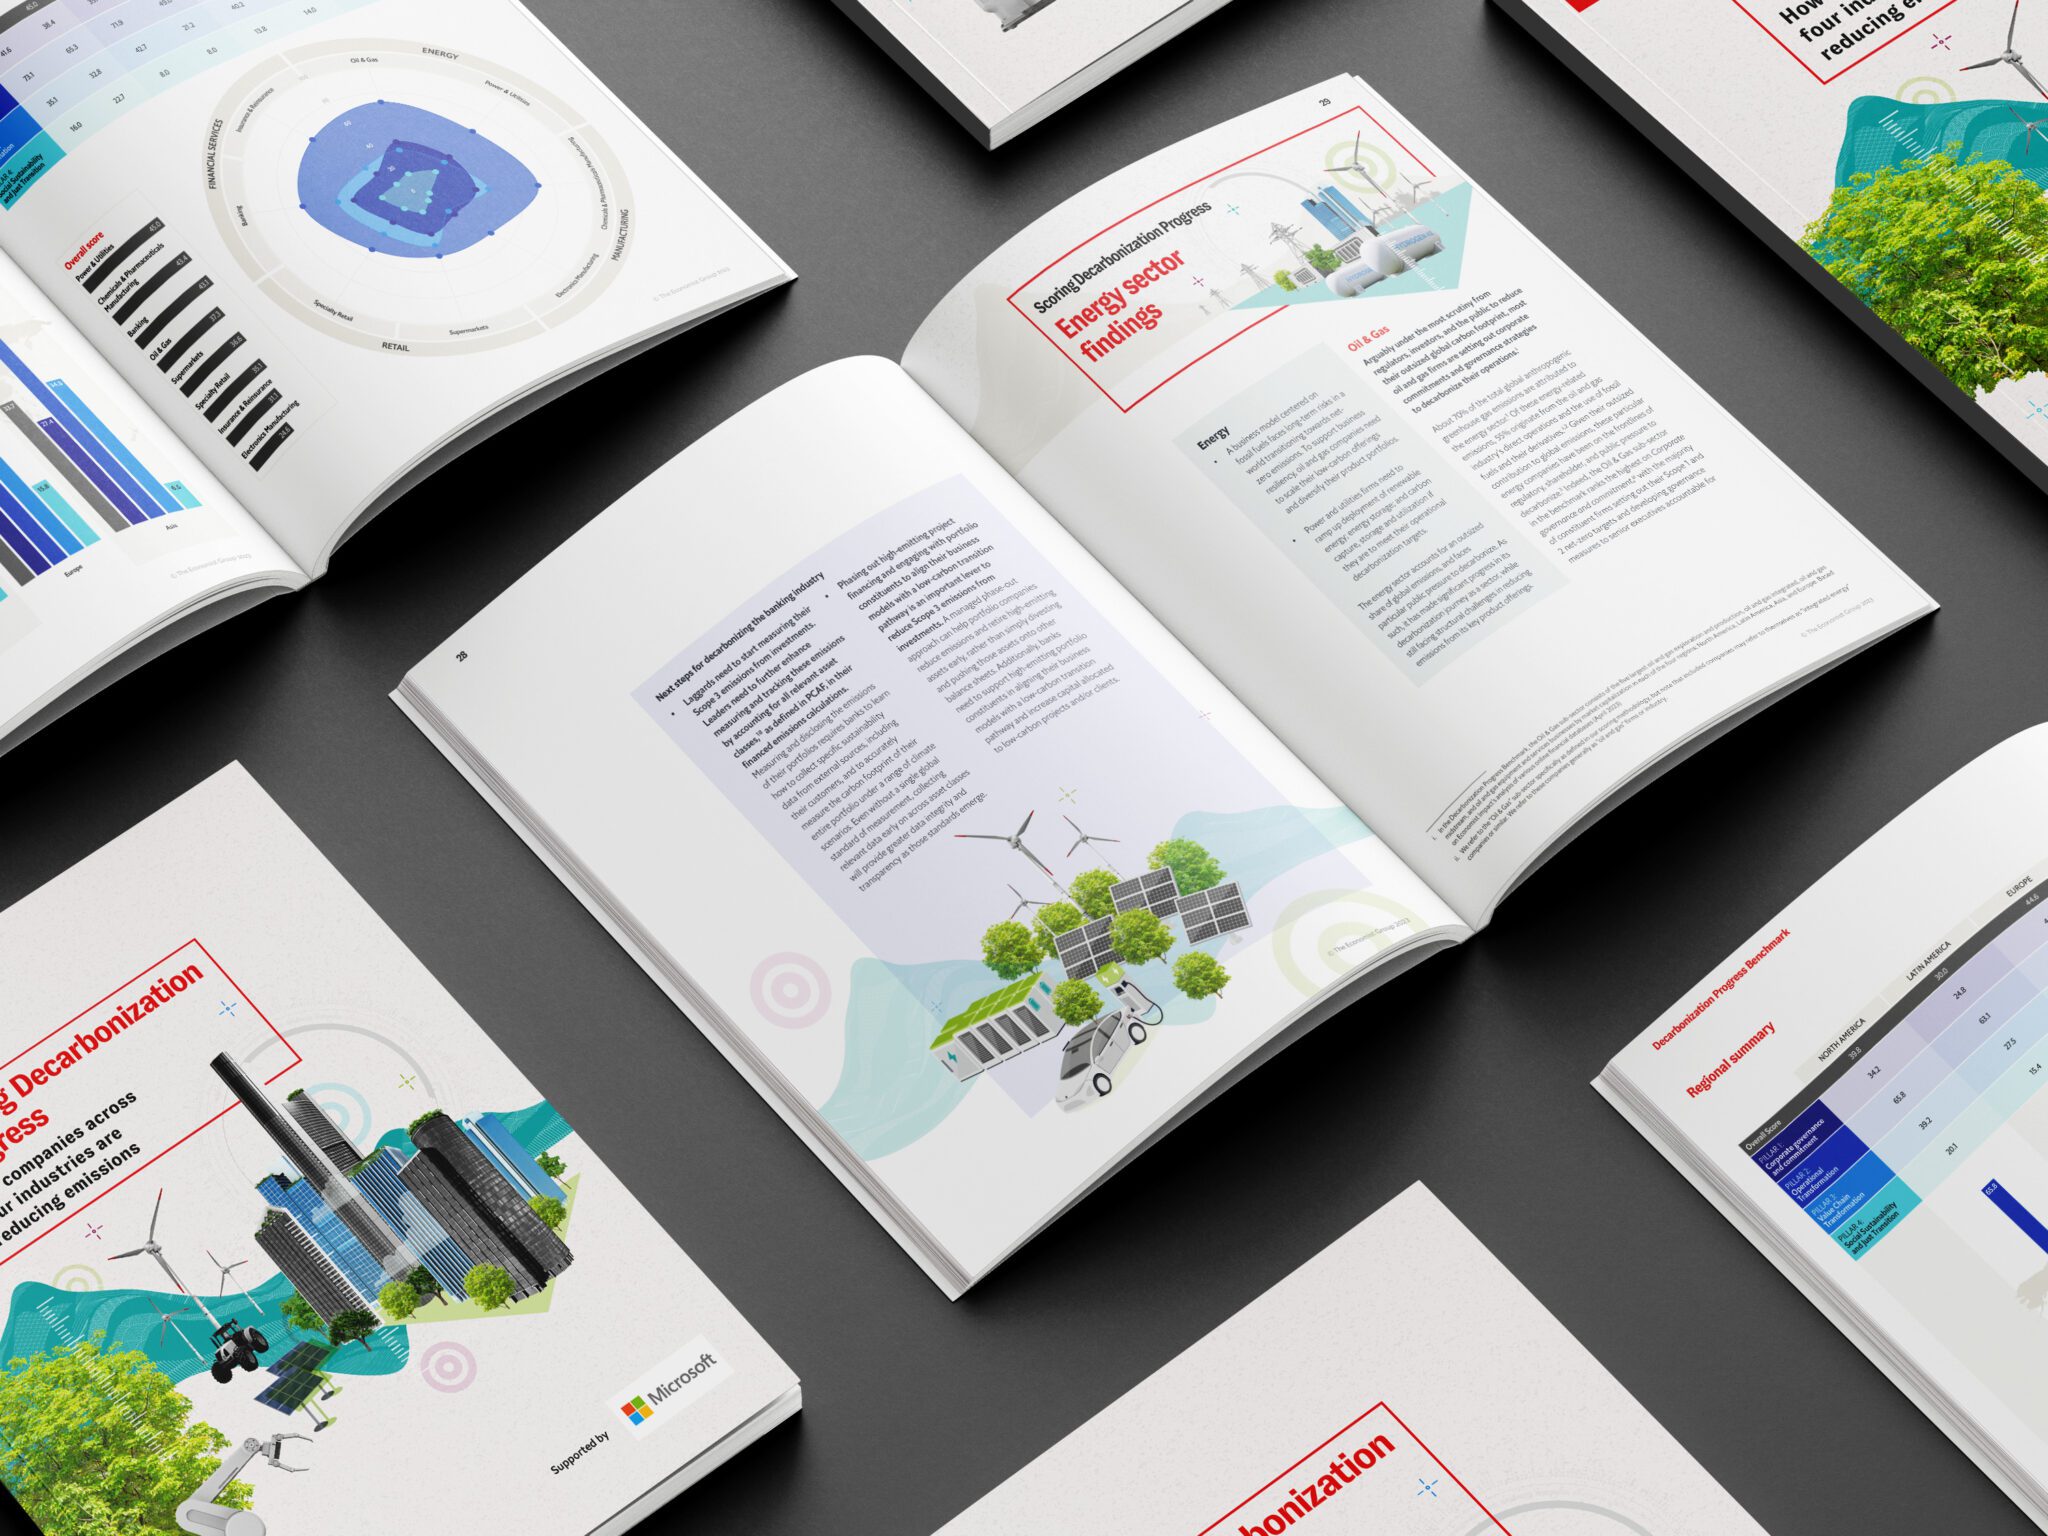 A collection of printed reports on Campaign Design, with infographics and illustrations spread out on a flat surface.